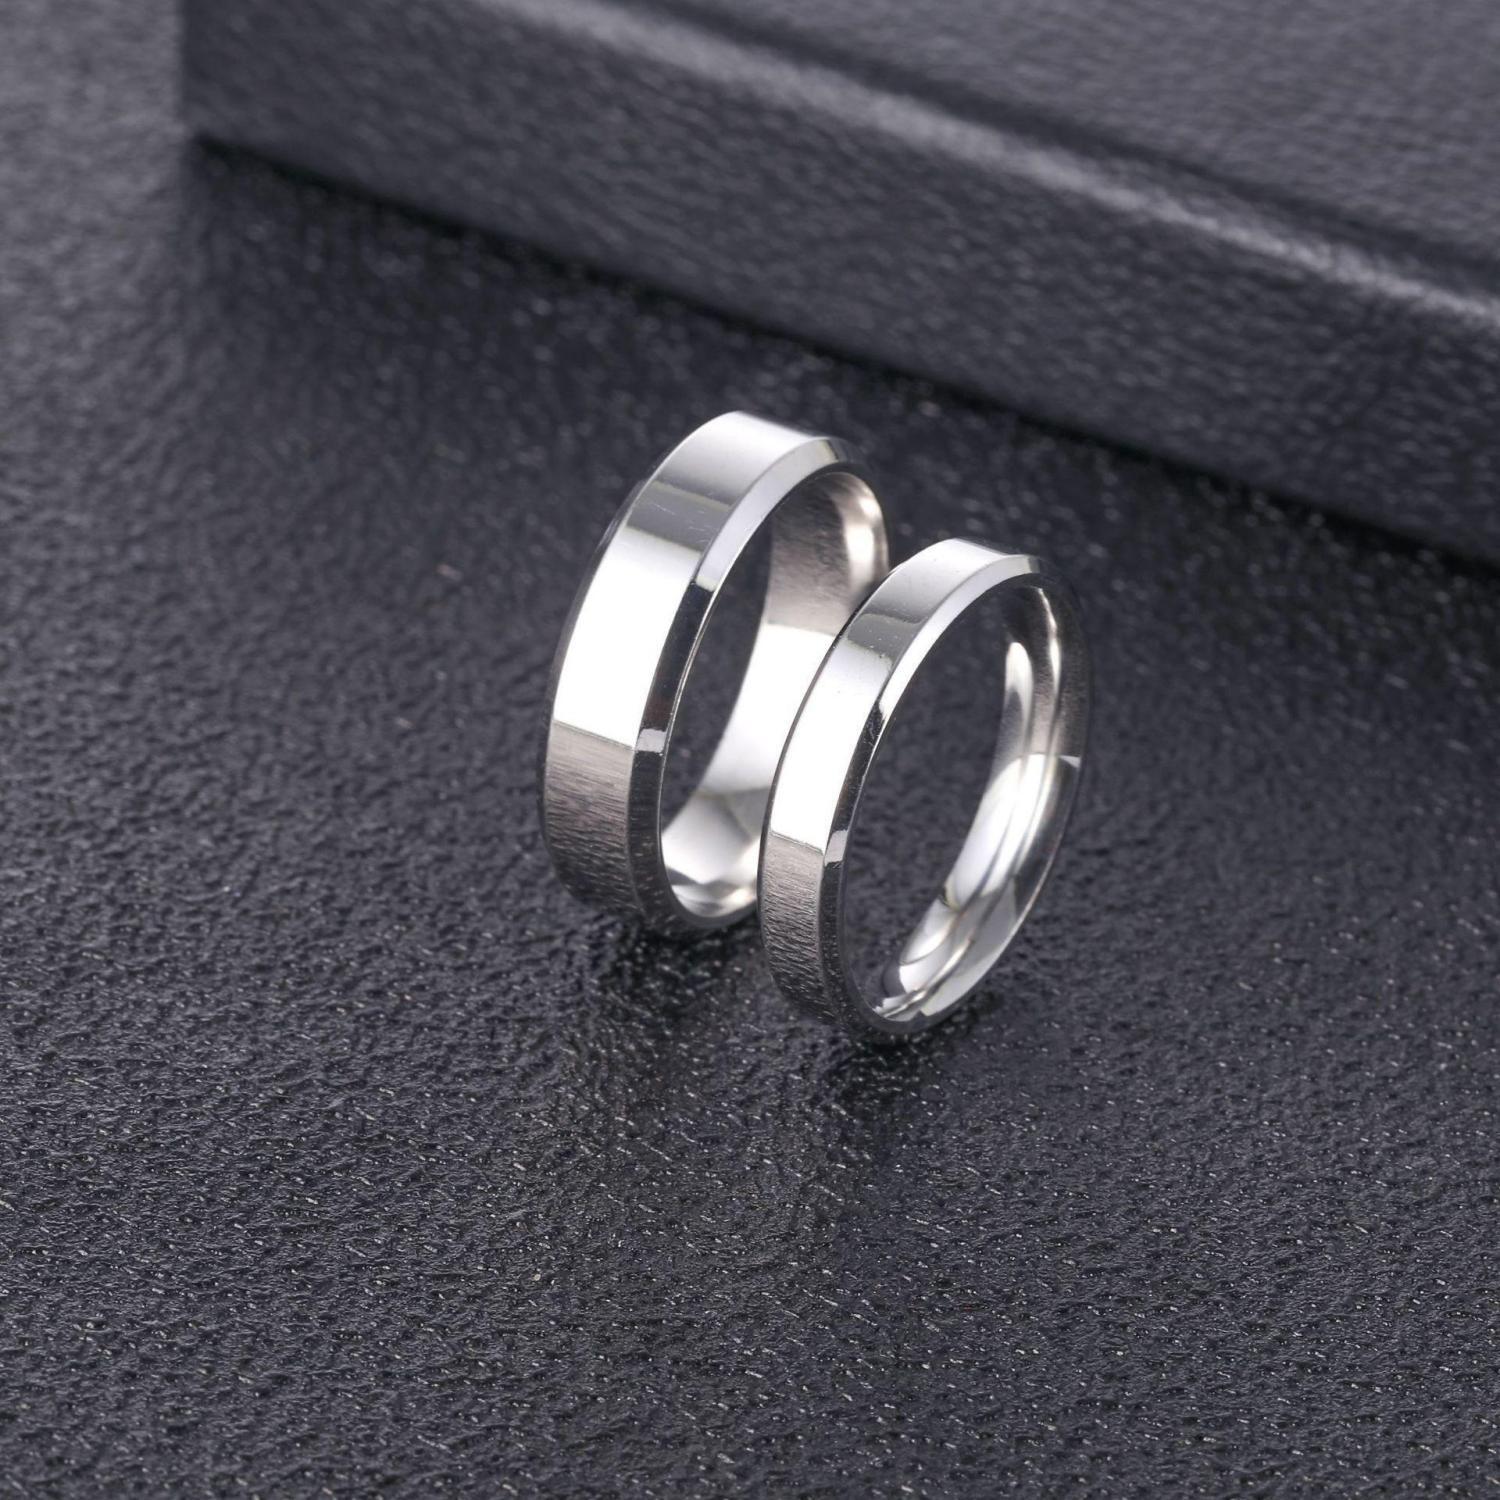 Engravable Simple Rings For Couples In Titanium - CoupleSets